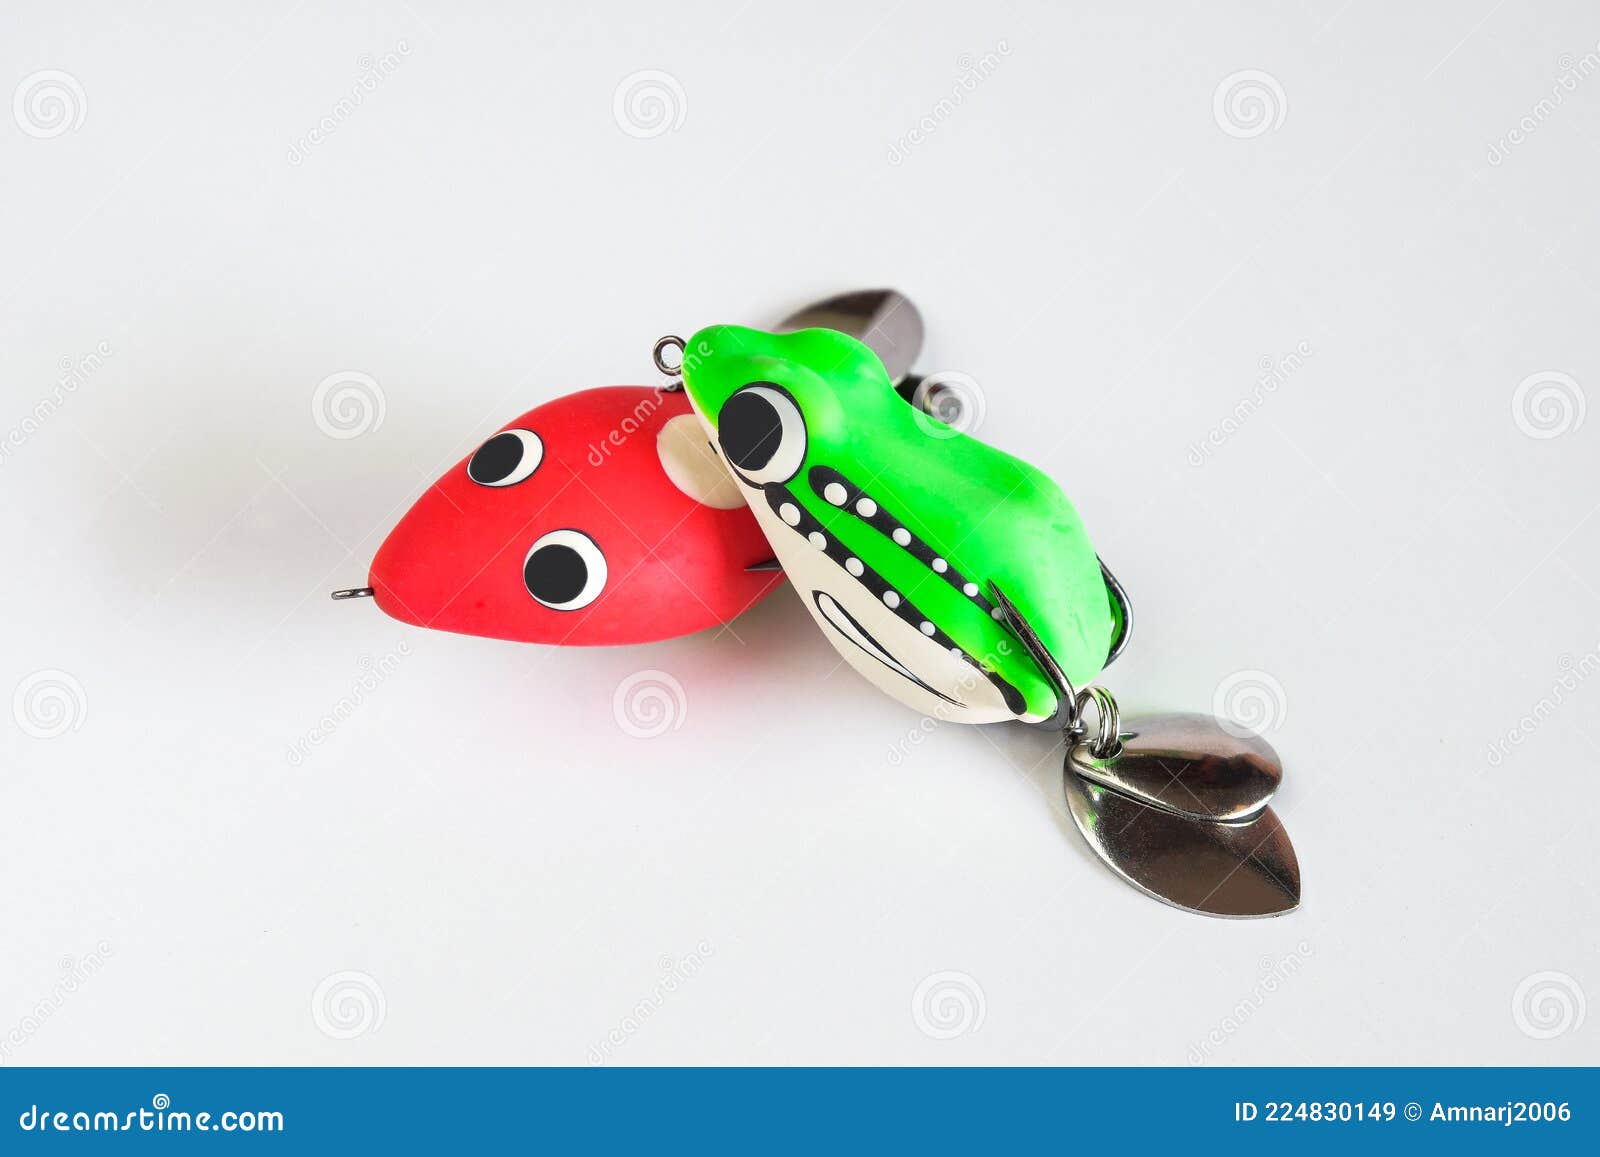 Fishing Hook with Soft Plastic in the Shape of a Frog Stock Image